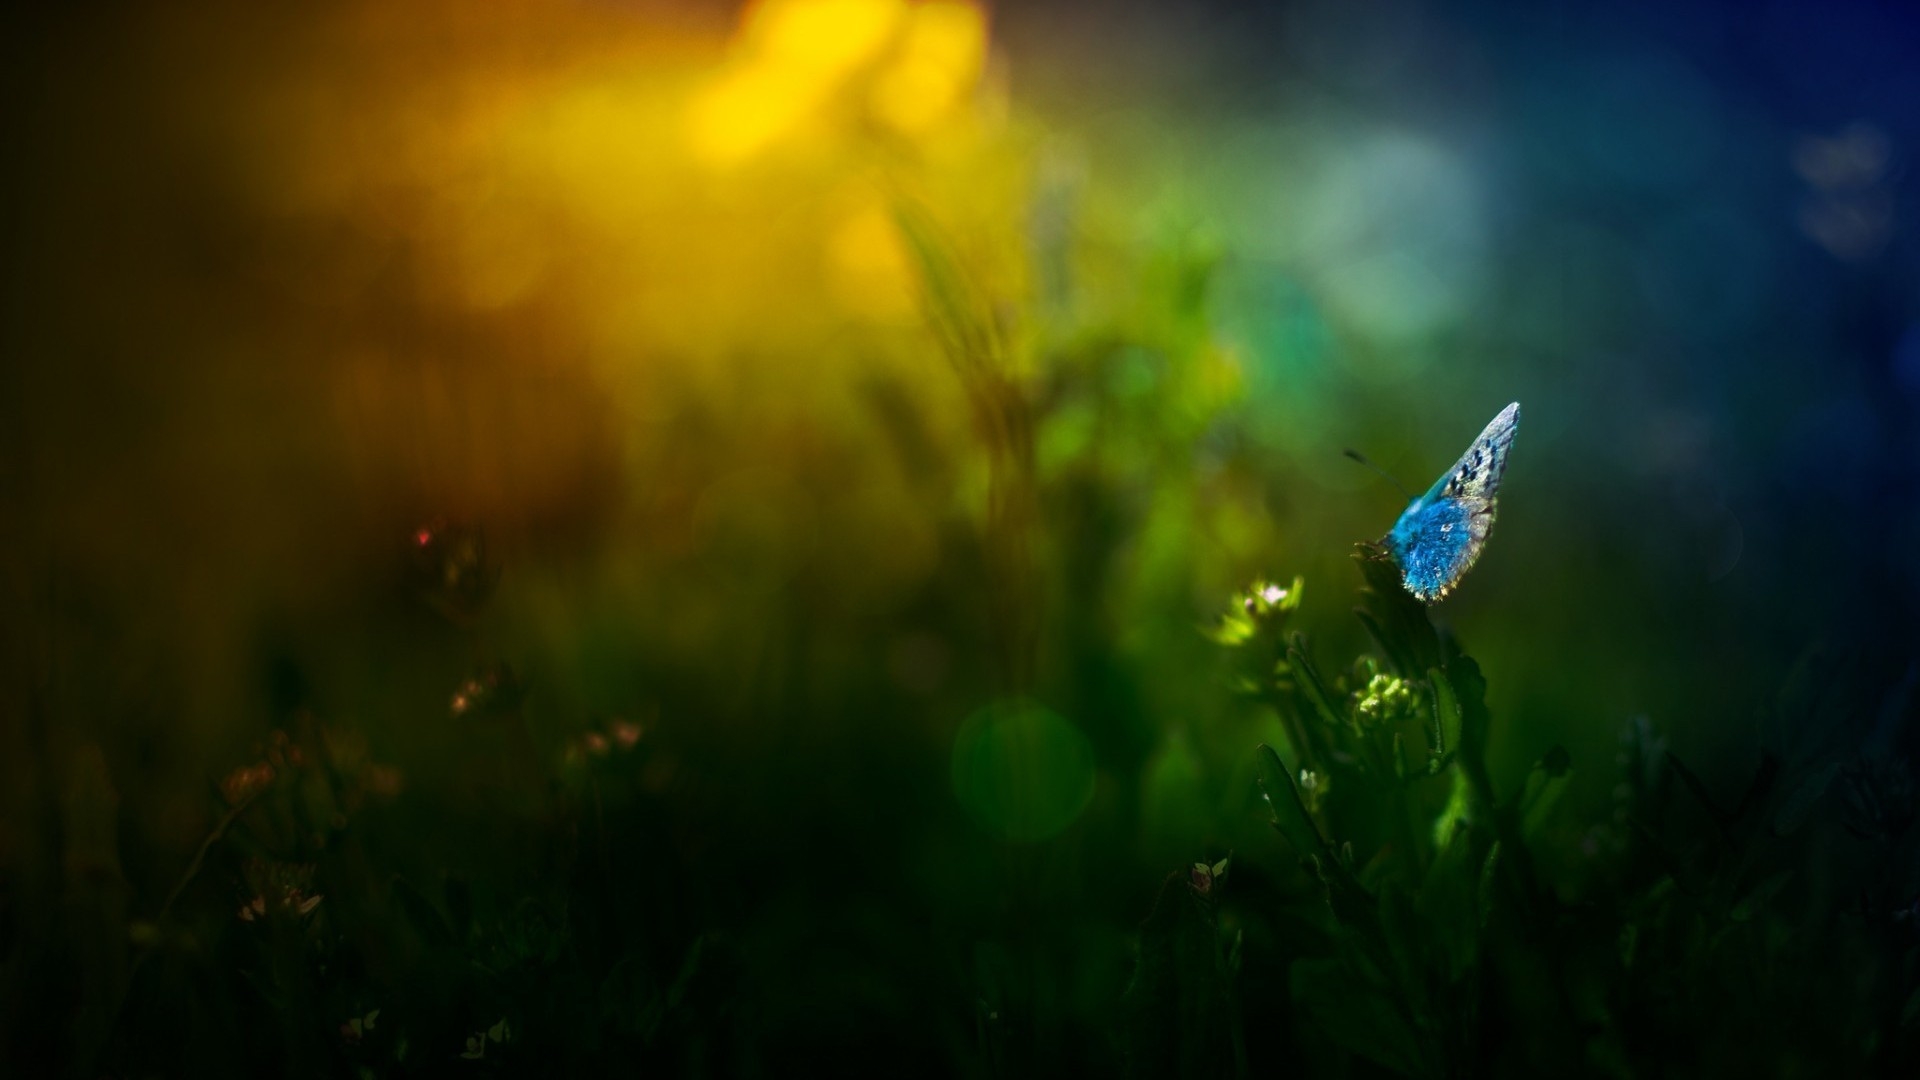 Blue Butterfly on Grass for 1920 x 1080 HDTV 1080p resolution